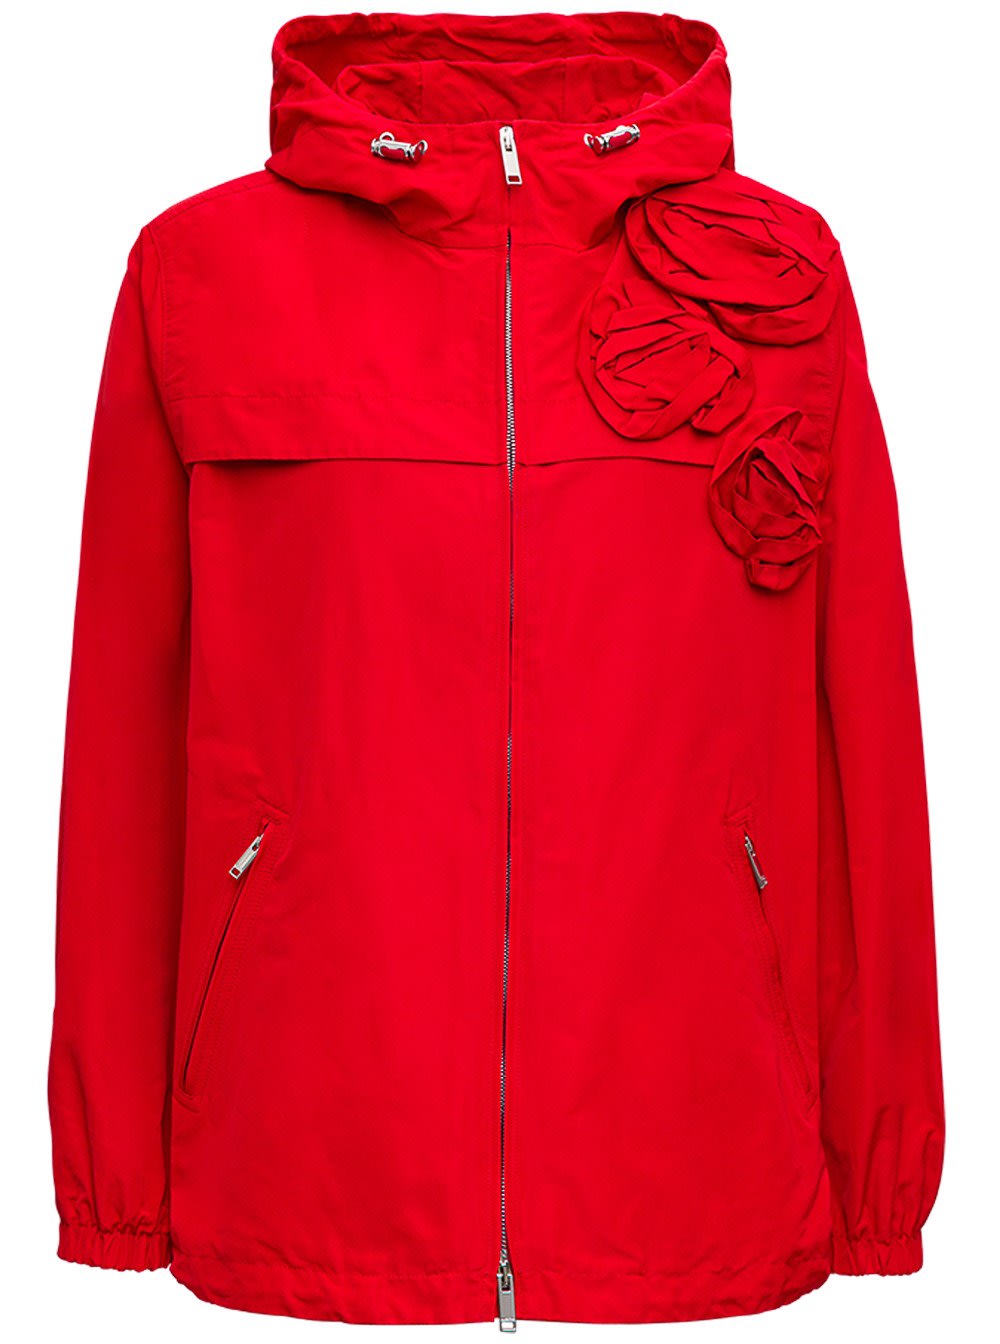 Valentino Red Cotton Blend Jacket With Rose Blossom Detail